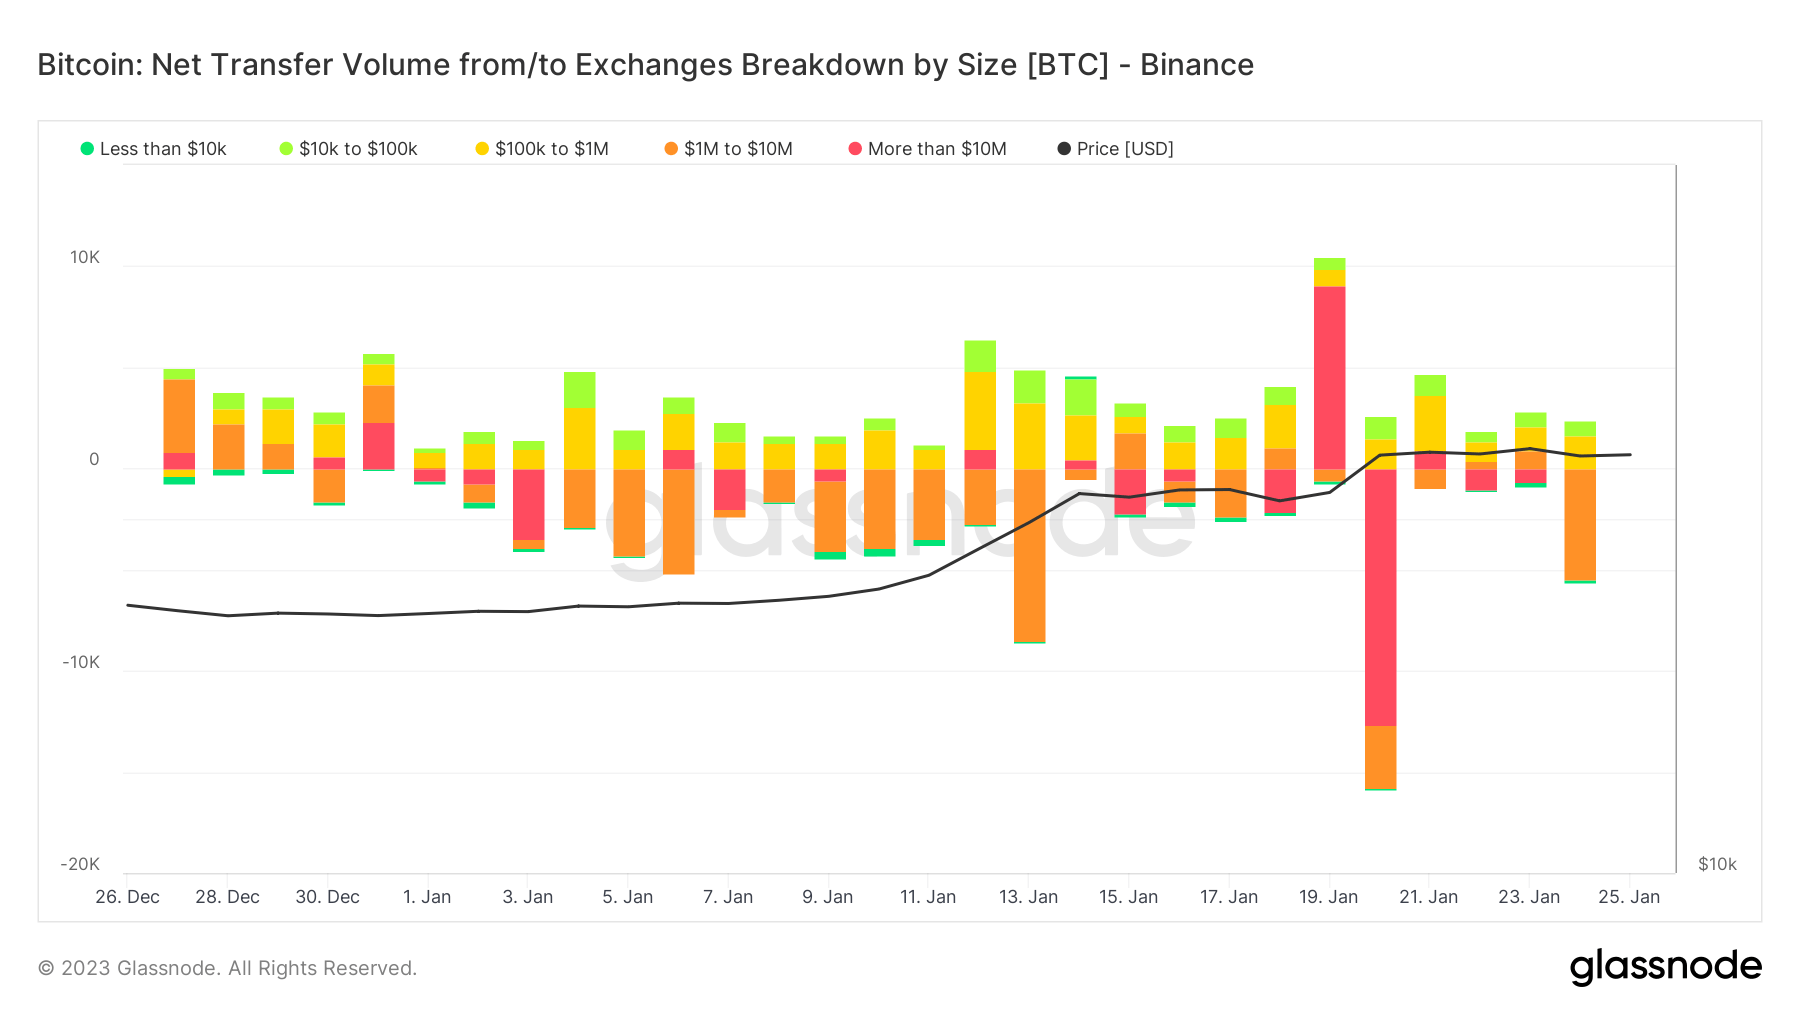 Net Transfer Volume/to Exchanges breakdown by size: (Source: Glassnode)